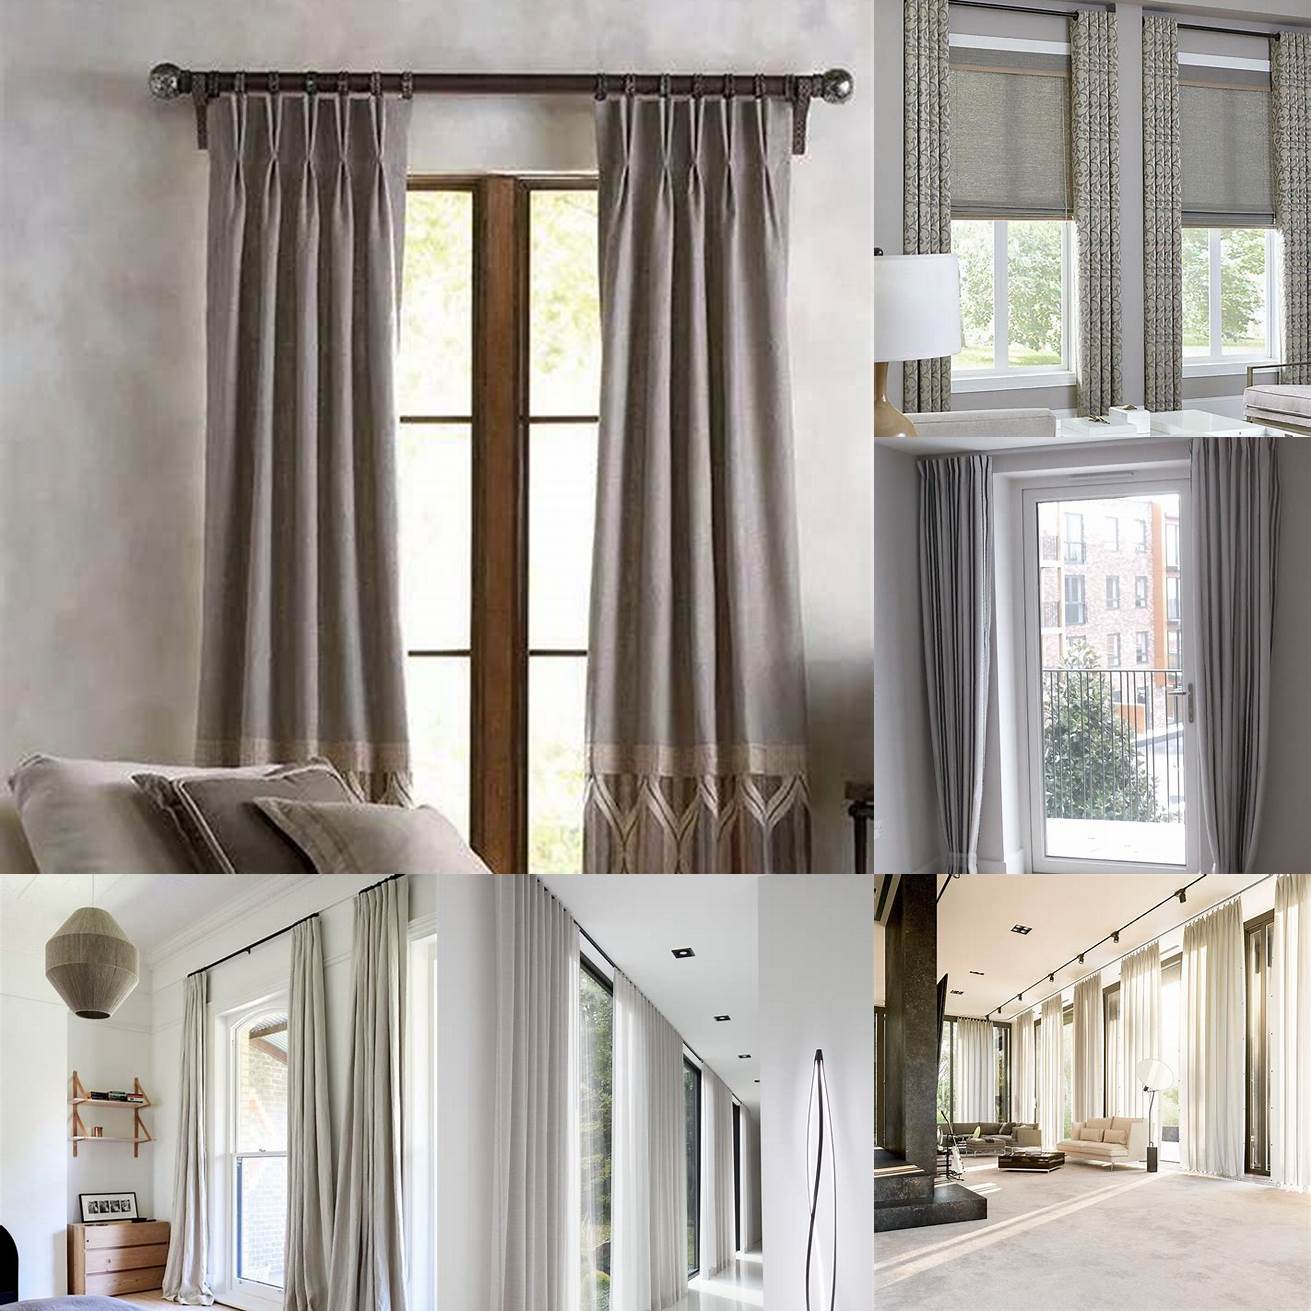 Floor-to-Ceiling Curtains